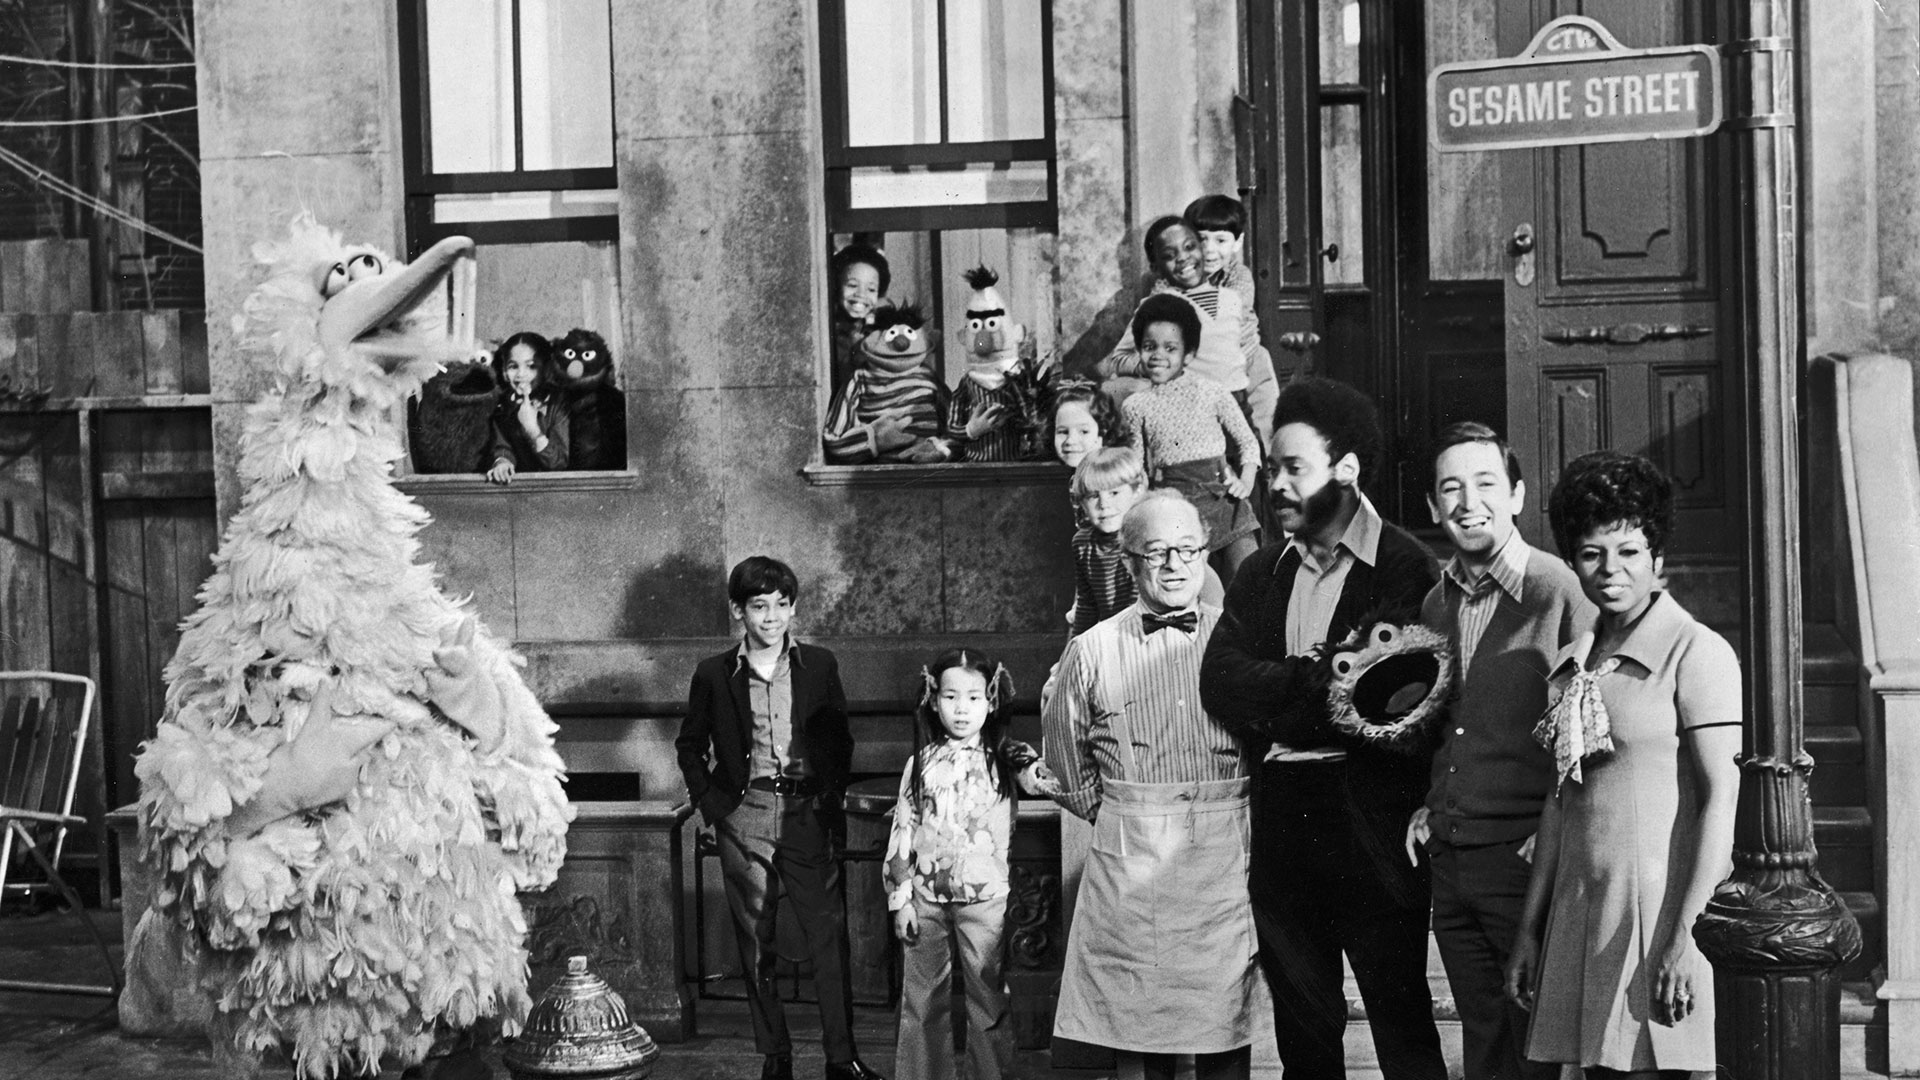 Circa 1969: Cast members of the TV show 'Sesame Street' pose on set with some of the puppet characters.  From left to right: Will Lee (1908 - 1982), Matt Robinson (1937 - 2002), Bob McGrath and Loretta Long with (from left to right) Big Bird, Cookie Monster, Grover, Ernie, Bert and Oscar the Grouch.  (Photo by the Hulton Archive/Getty Images)